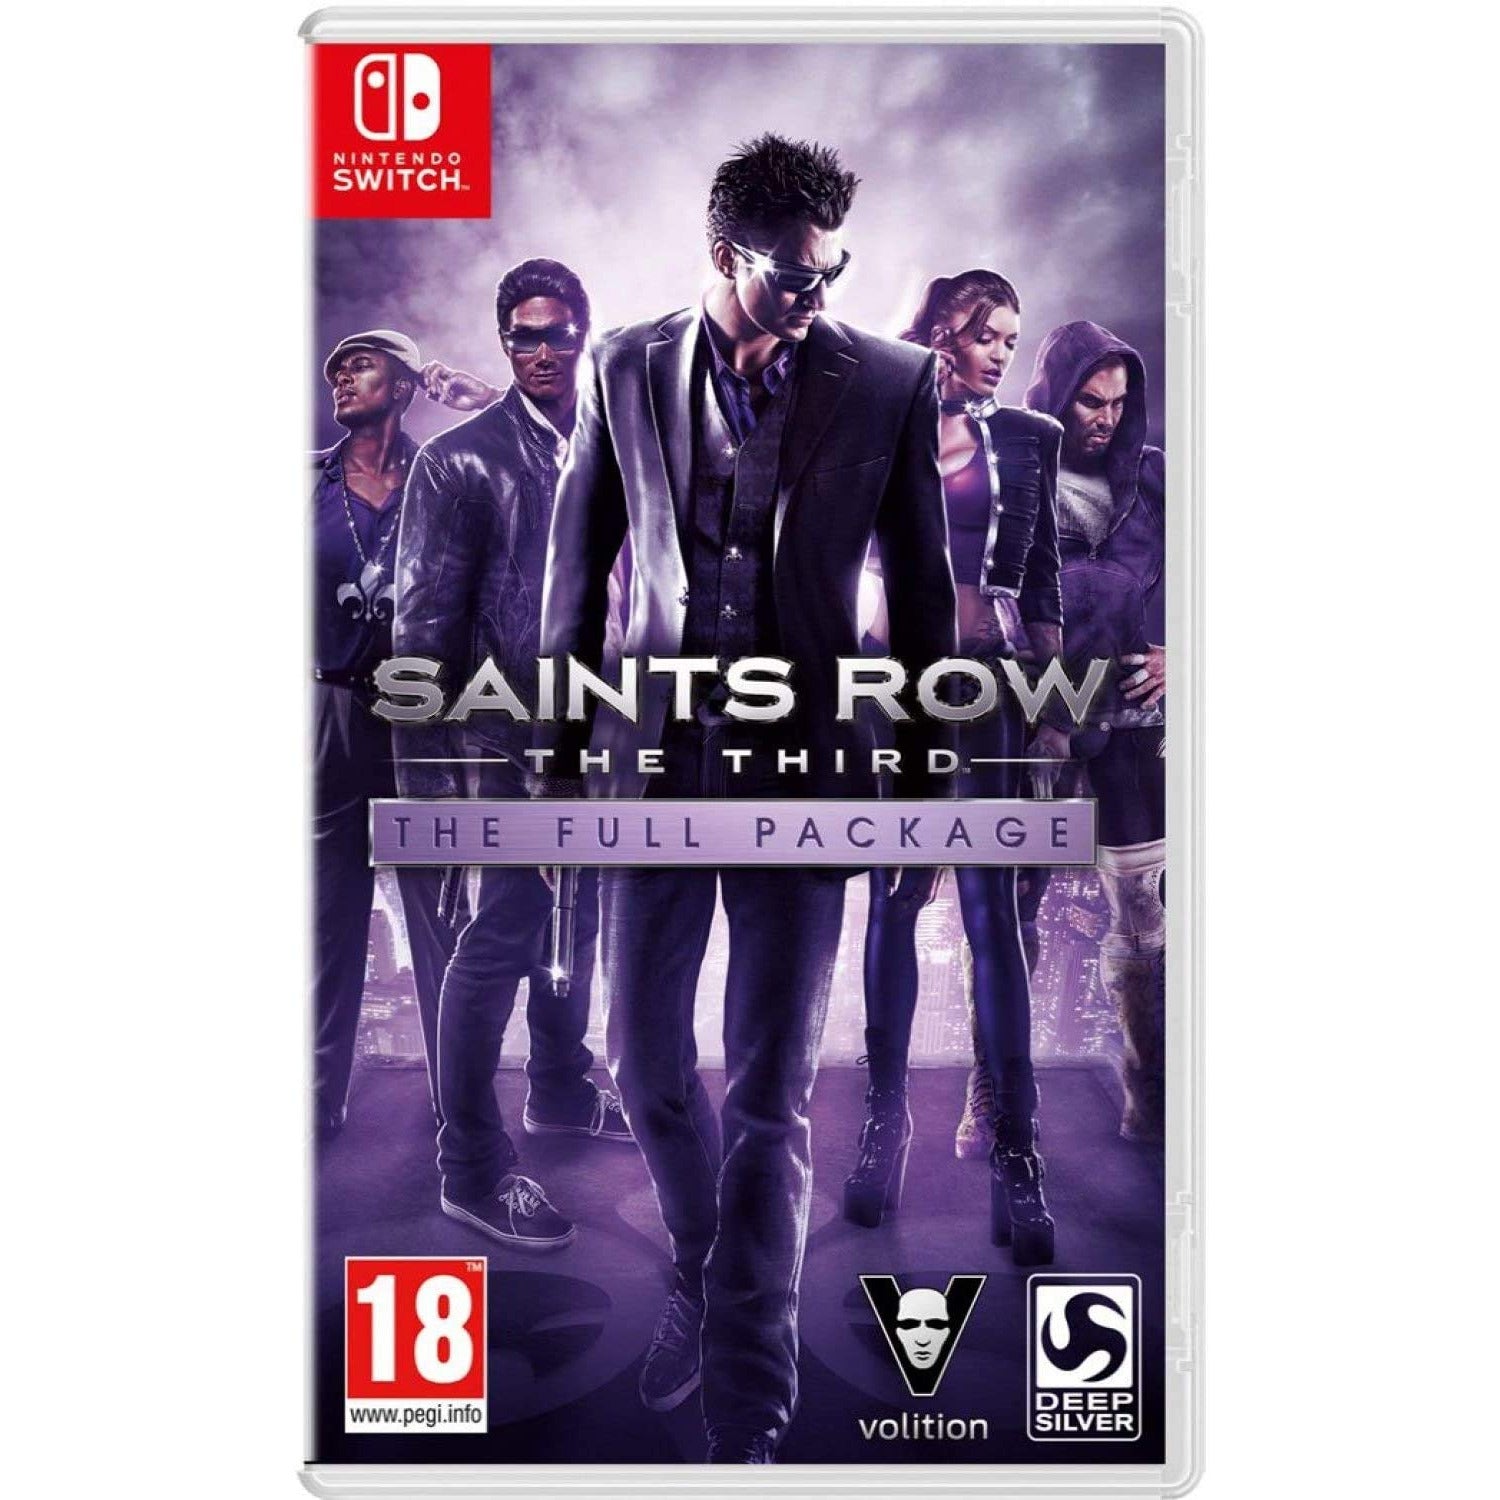 Saints Row The Third: The Full Package para Nintendo Switch